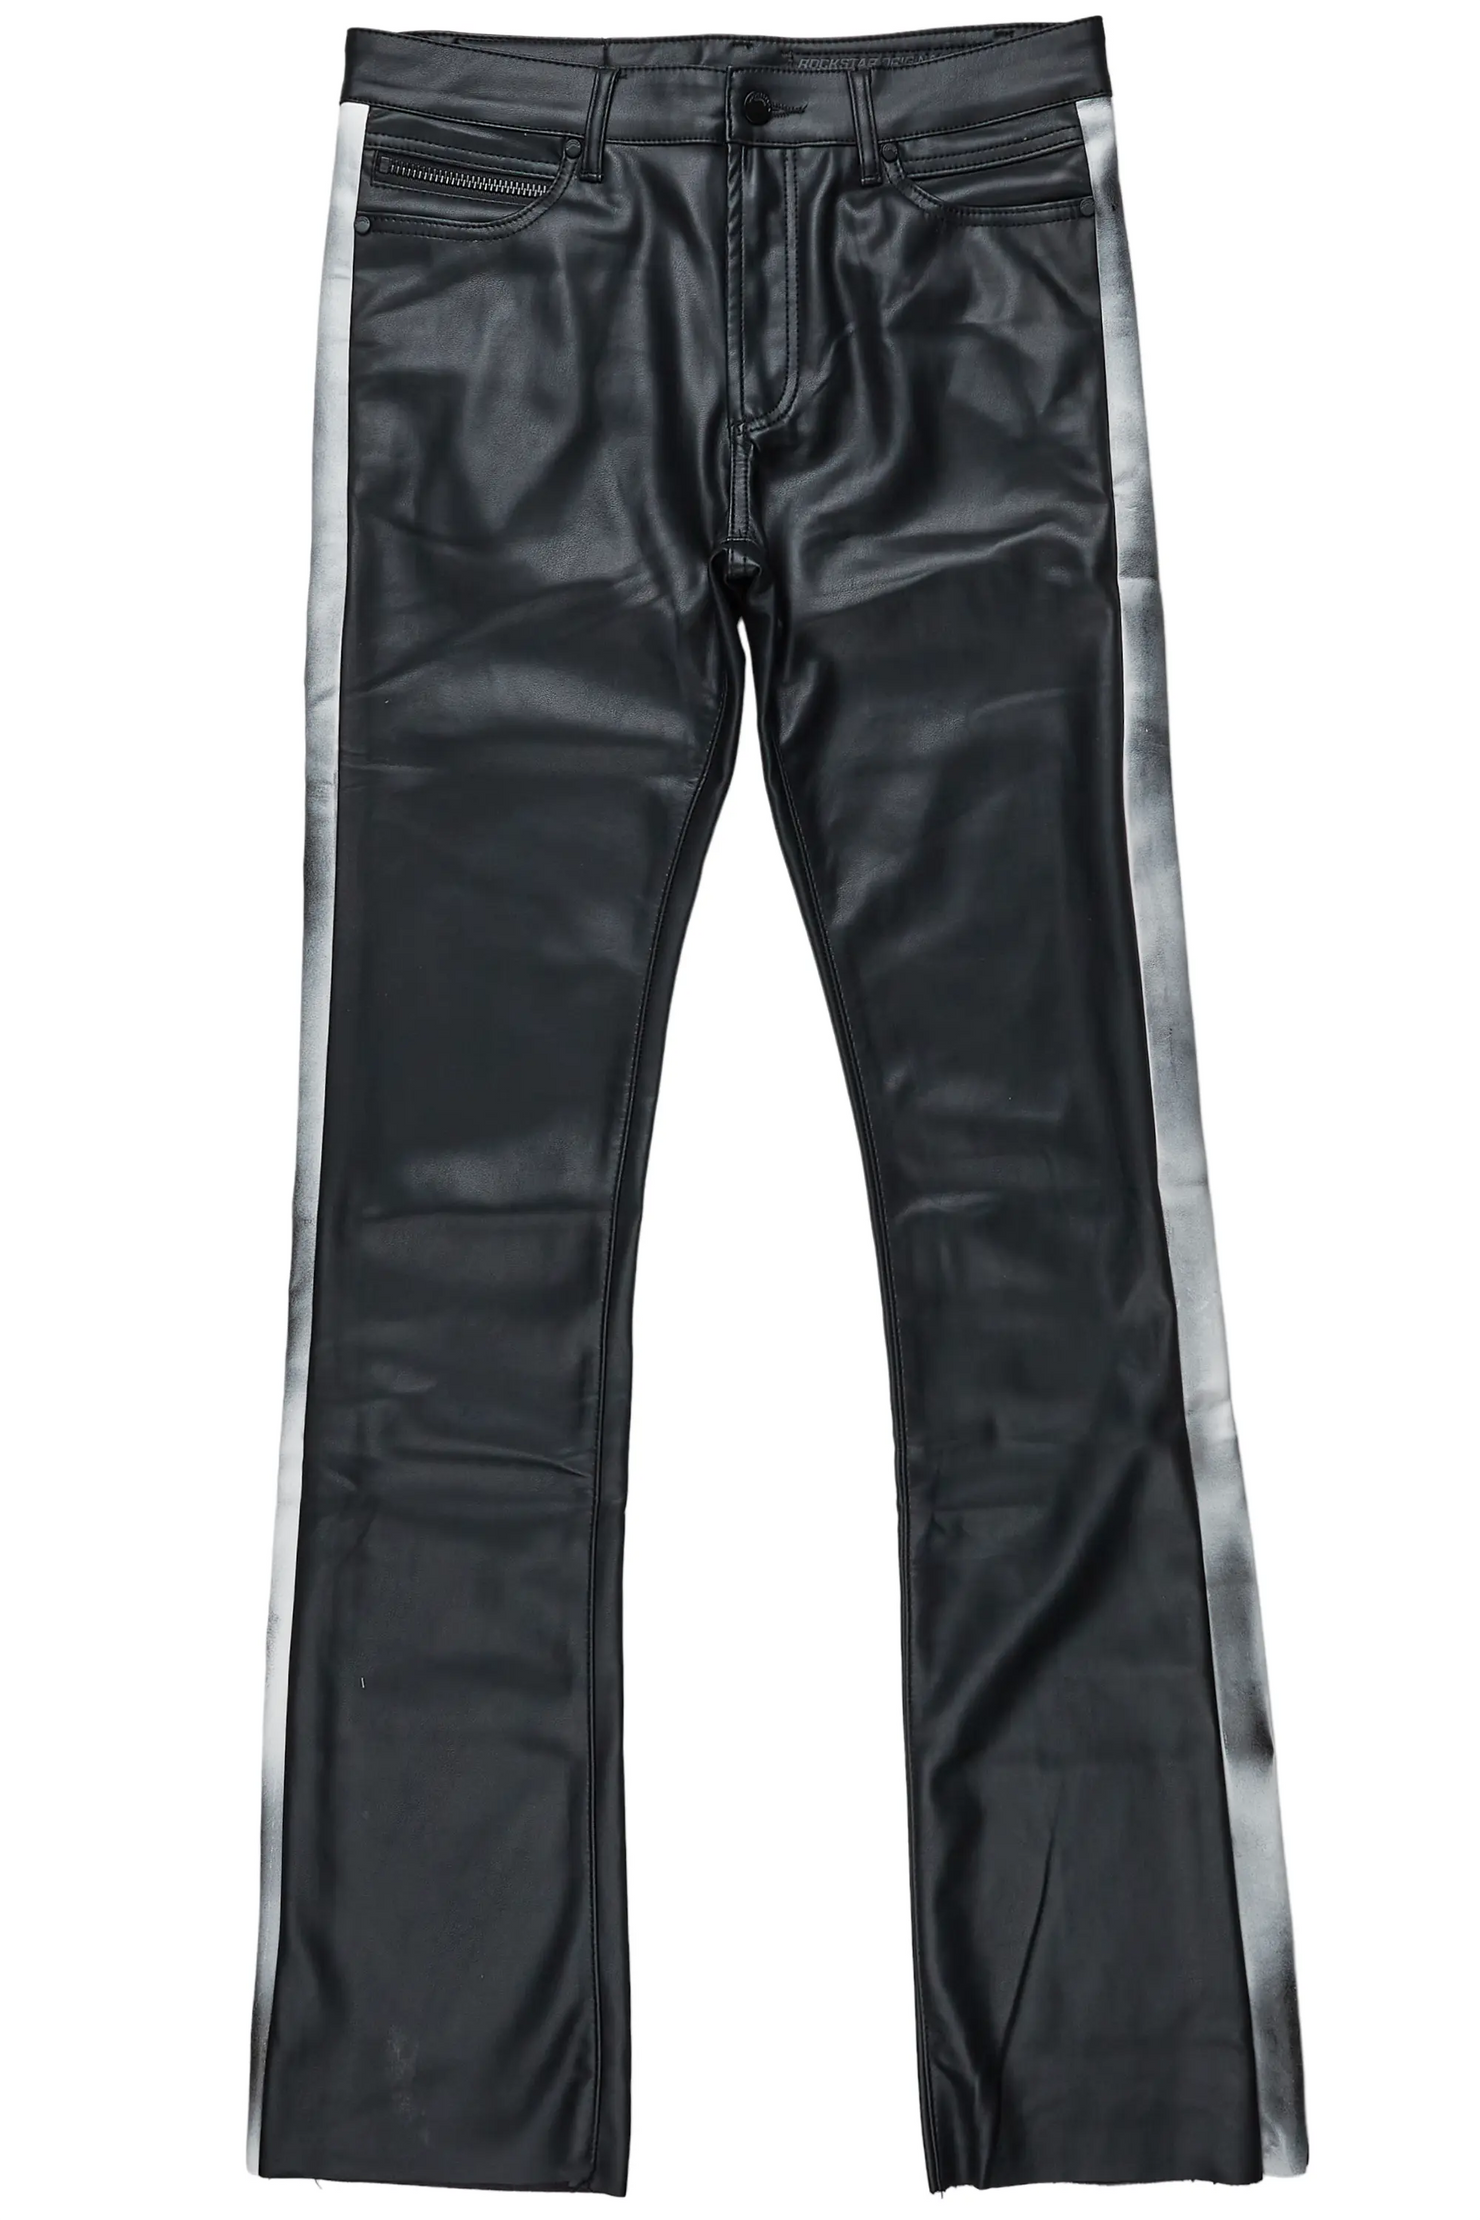 Fusao Black Stacked Faux Leather Jean